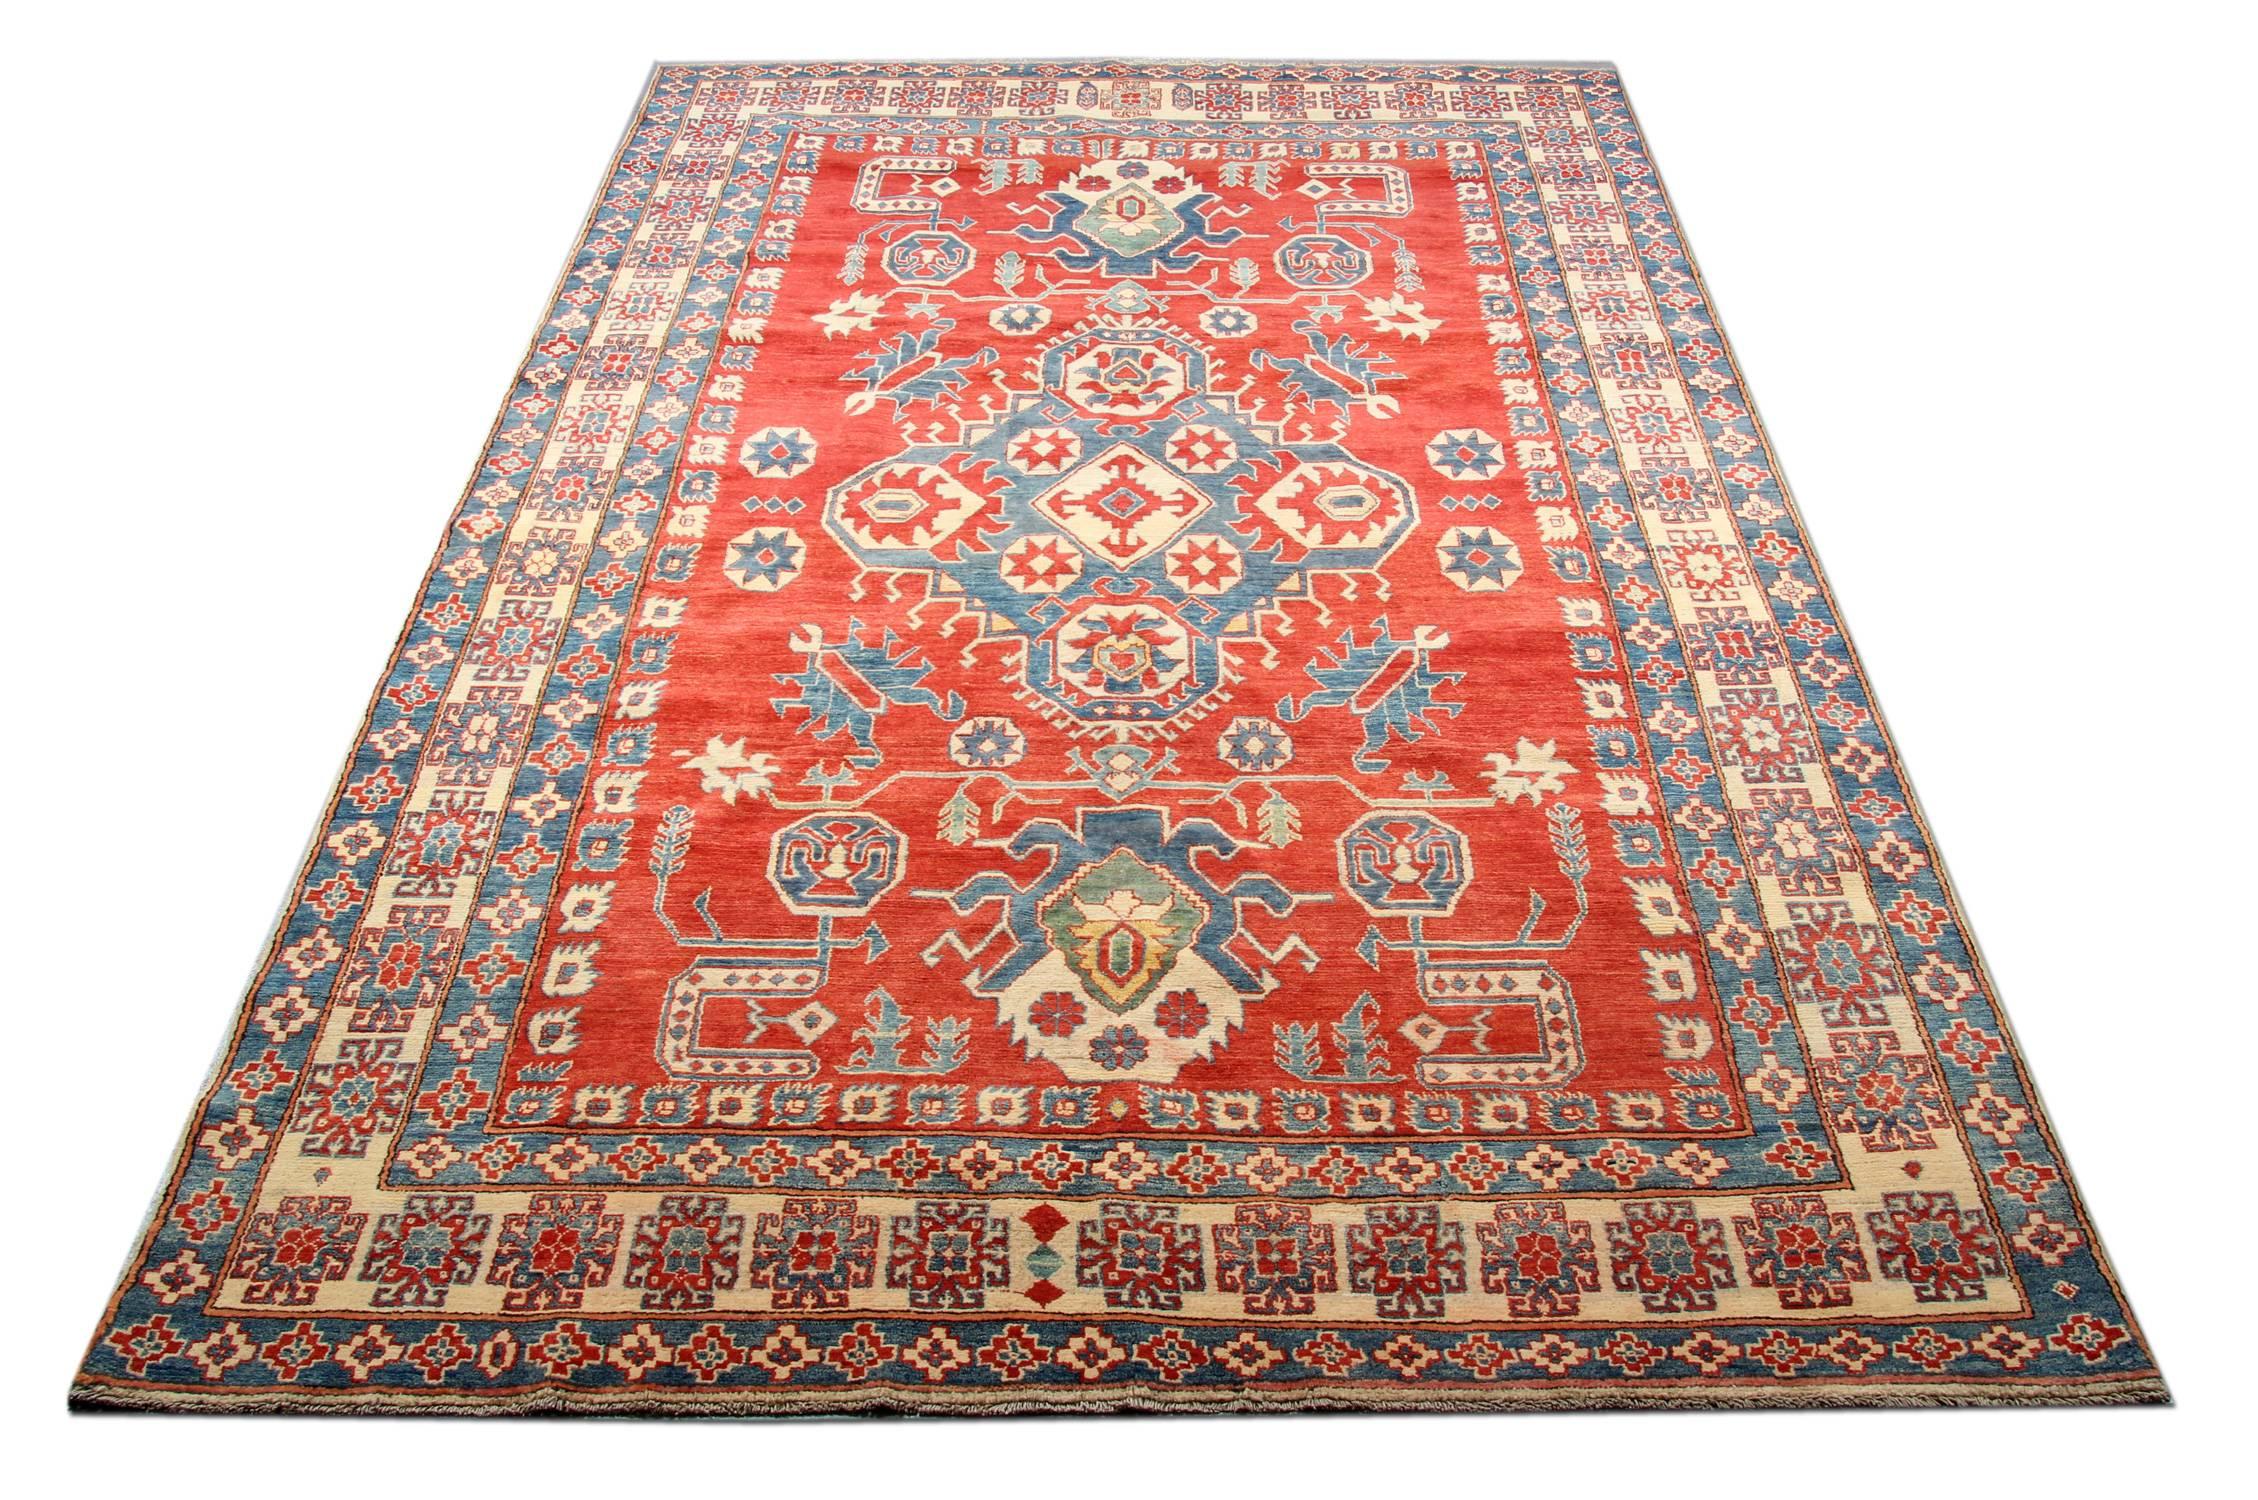 Oriental rugs are handwoven featuring Kazak designs. Handmade rugs are making the region of Afghanistan. This tribal rug was made by Afghan weavers of top quality wool and cotton. It features typical geometric rug patterns. Dominant colours of this